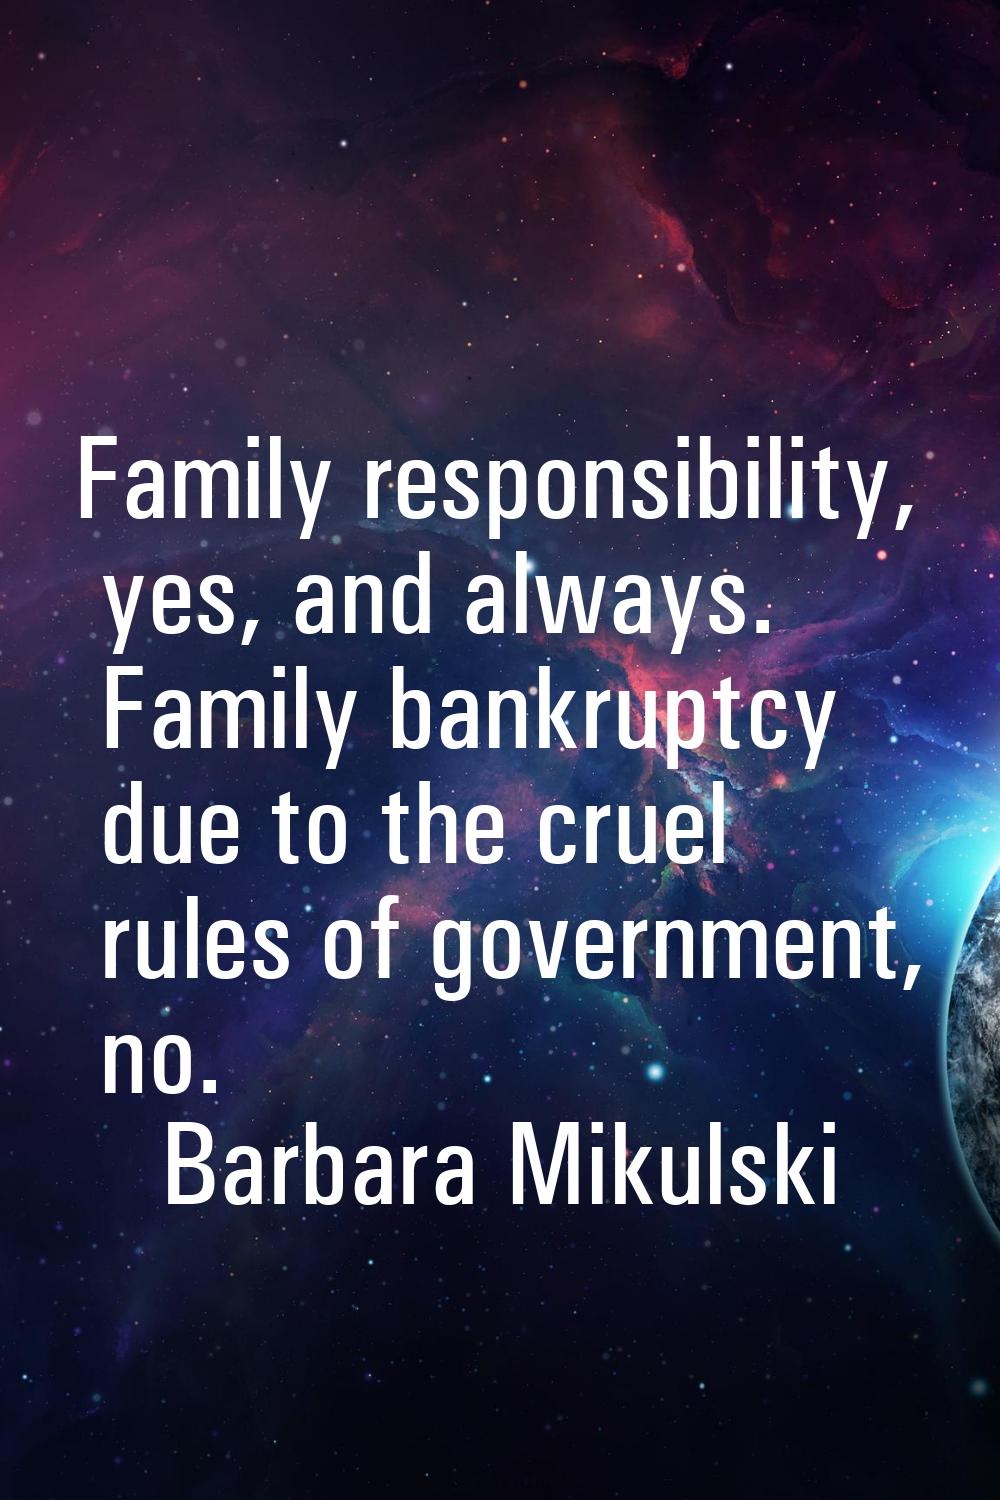 Family responsibility, yes, and always. Family bankruptcy due to the cruel rules of government, no.